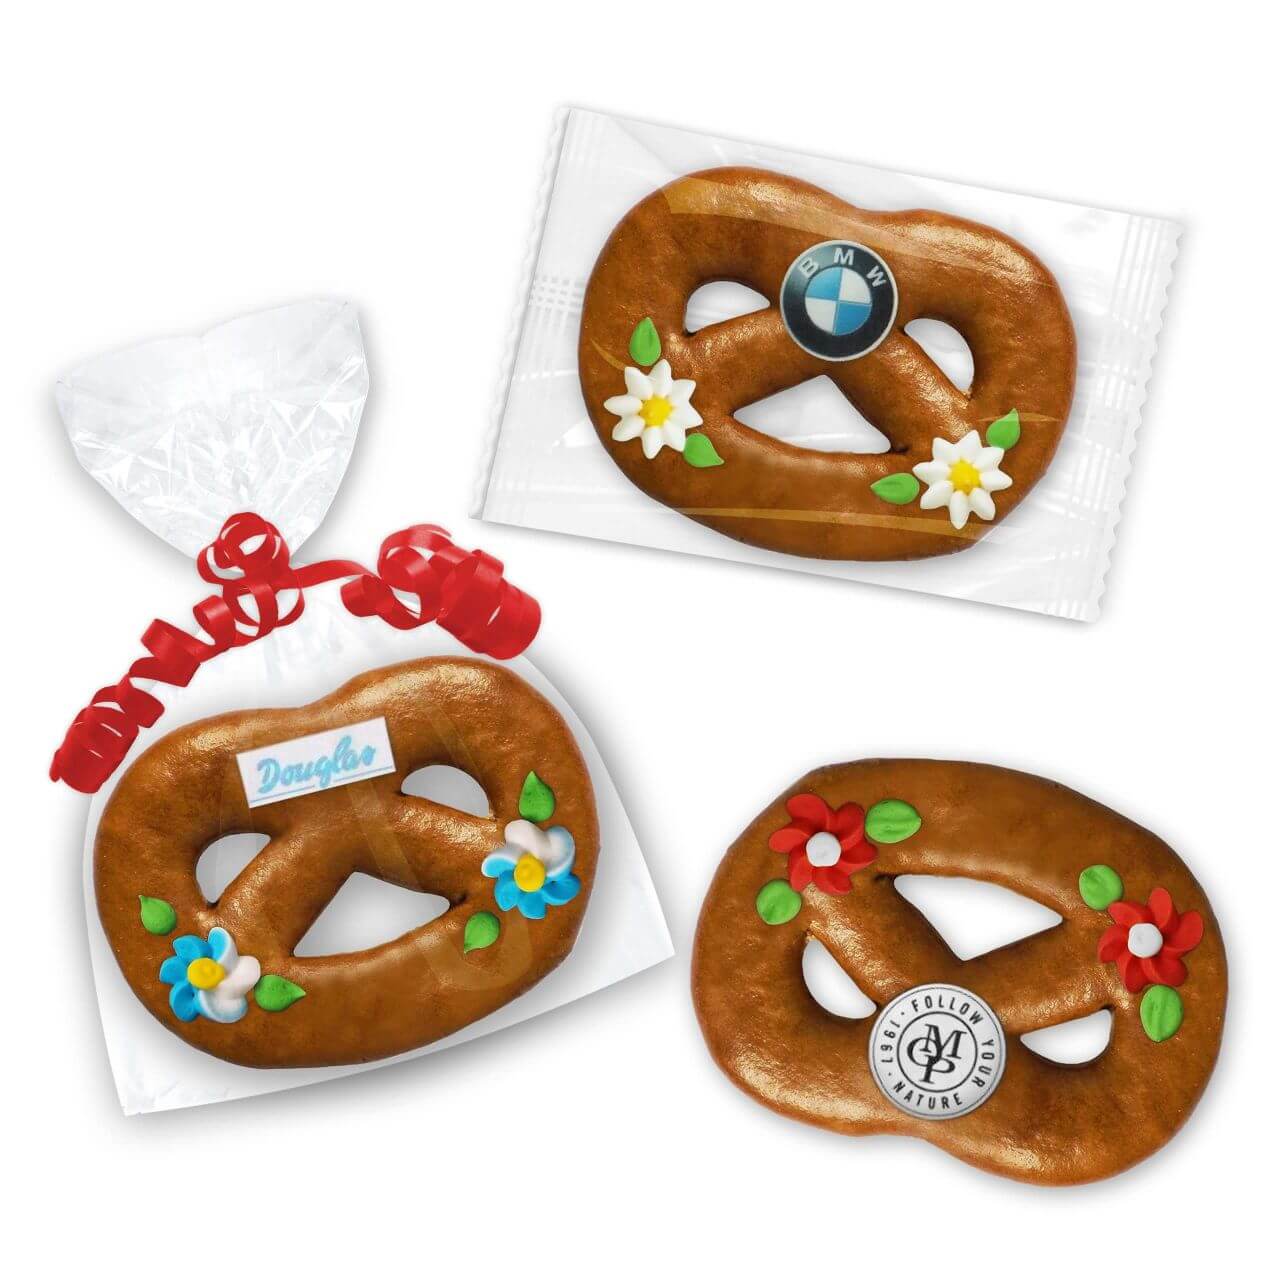 Packaging overview of the gingerbread pretzel